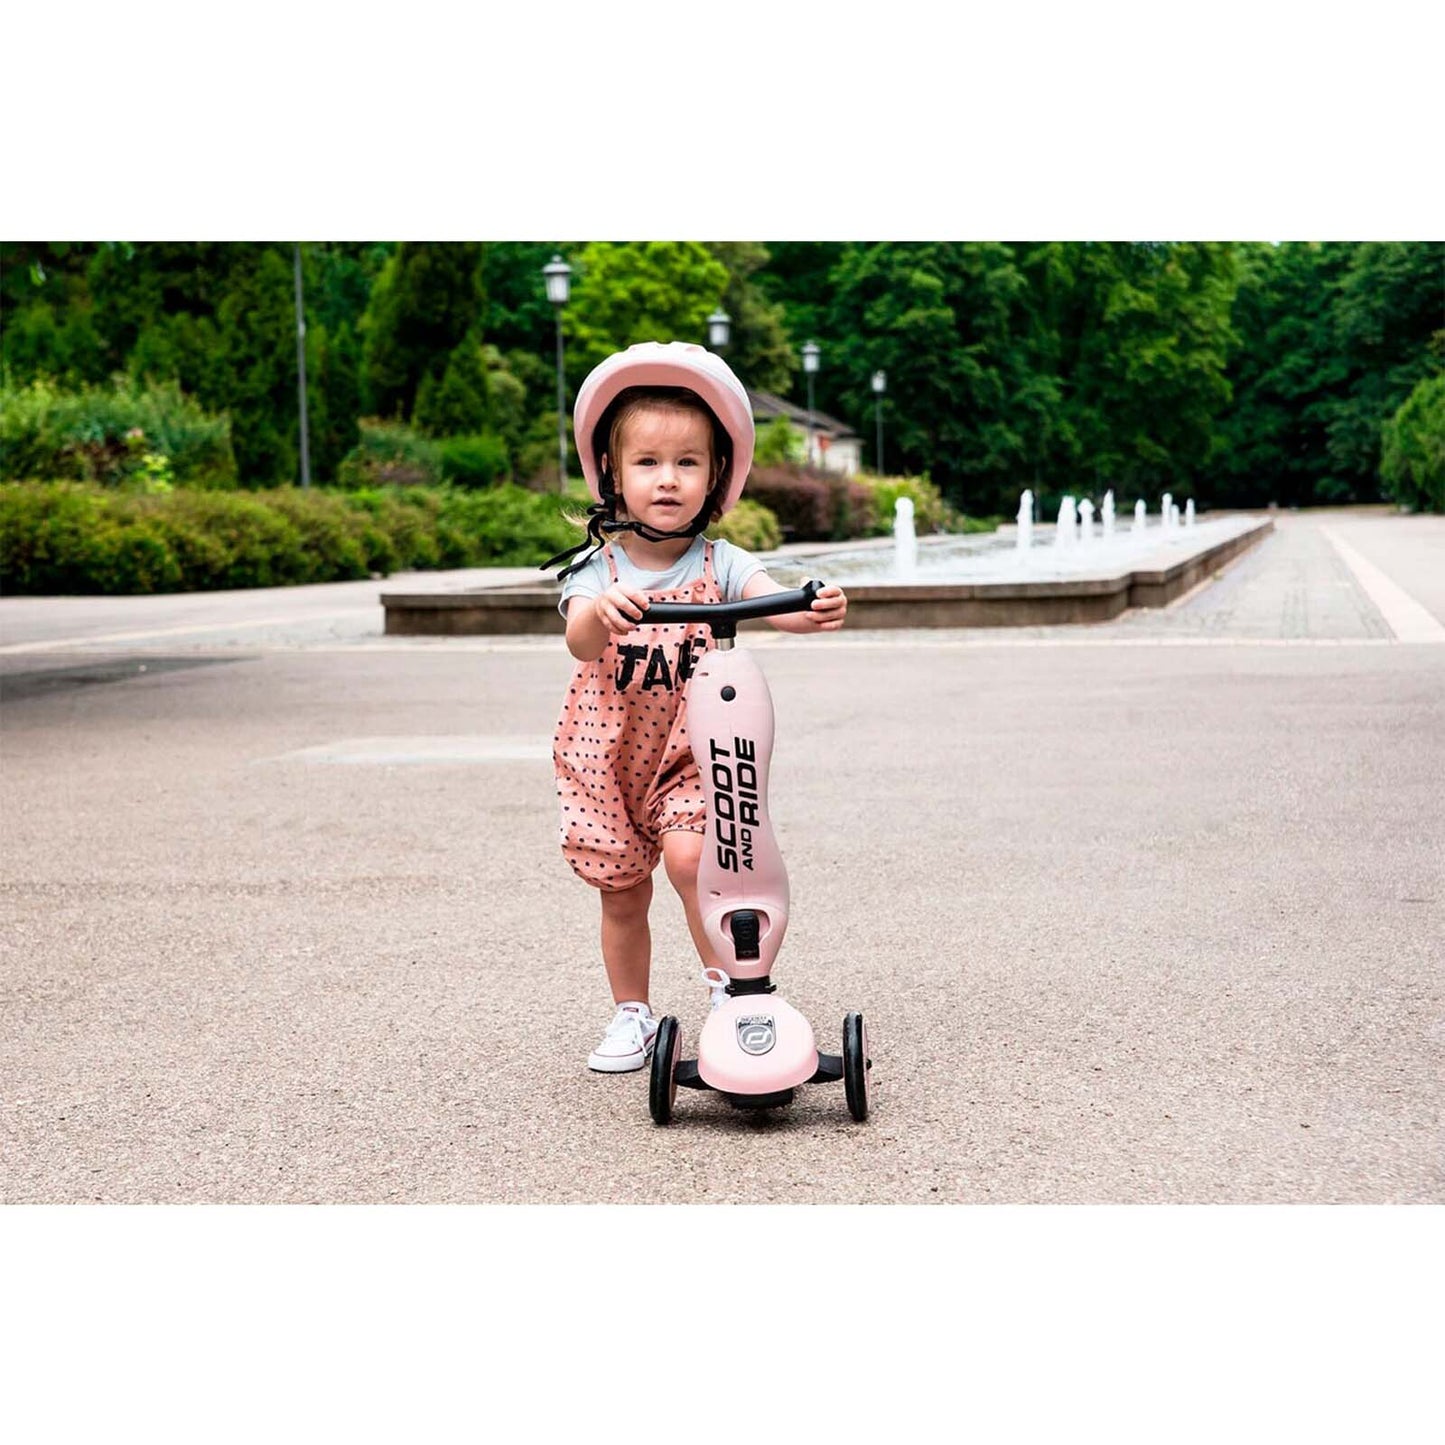 Scoot & Ride - Highwaykick1 Scooter For Toddler 1-5Y (Rose)